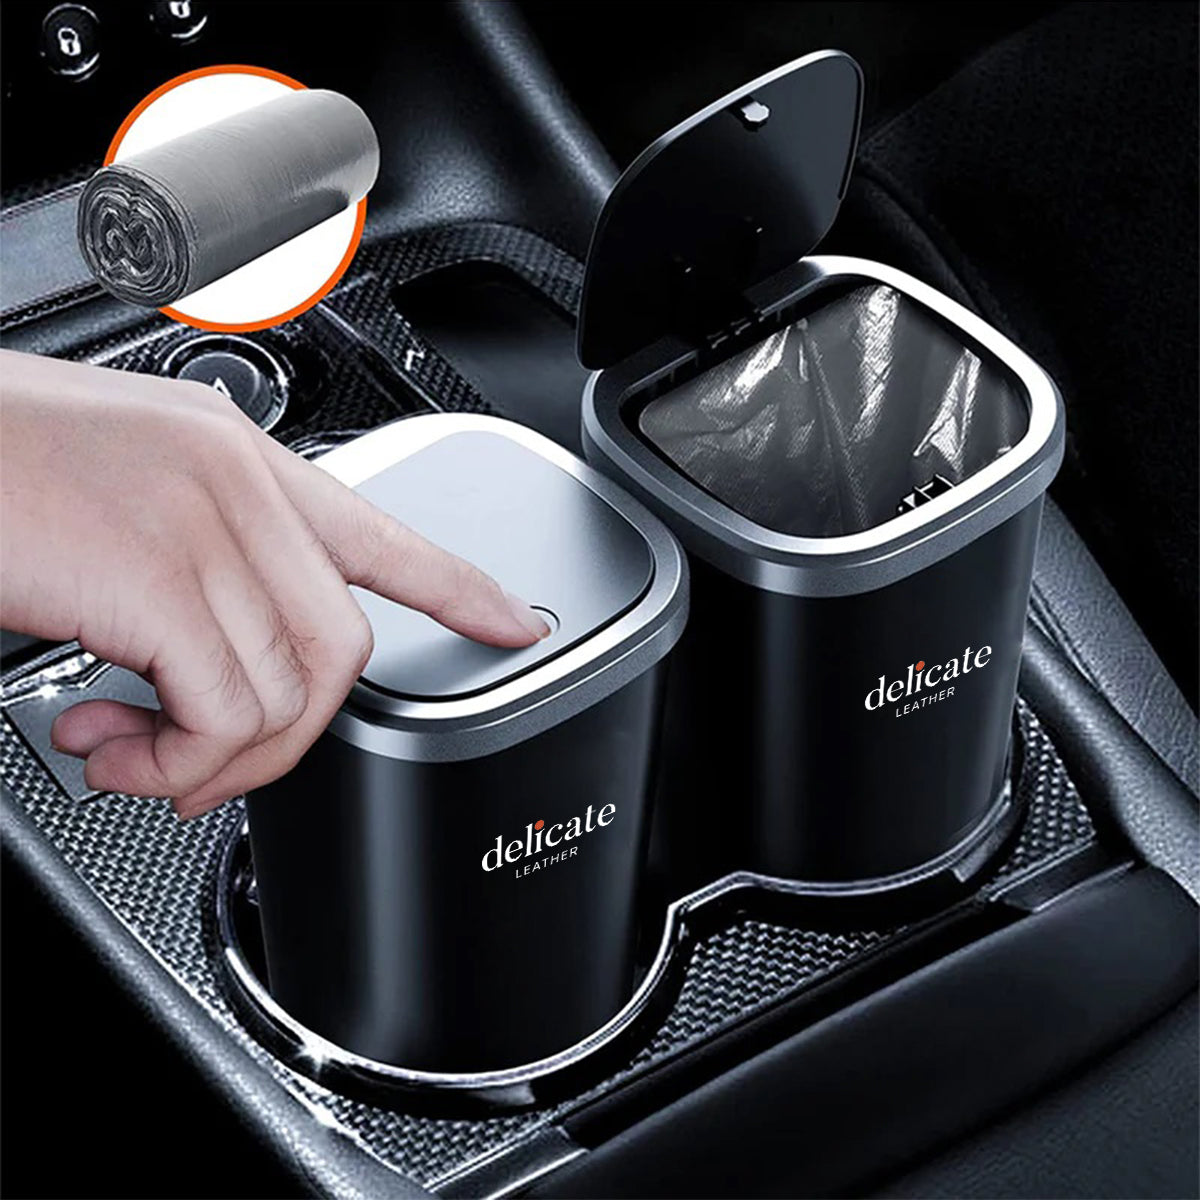 Car Trash Cans, Custom For Your Cars, Compact & Durable Car Accessories for Interior Use 2 Pack, Practical Car Organizers and Storage Cups with Pop-Up Open, Car Accessories MS11993 - Delicate Leather